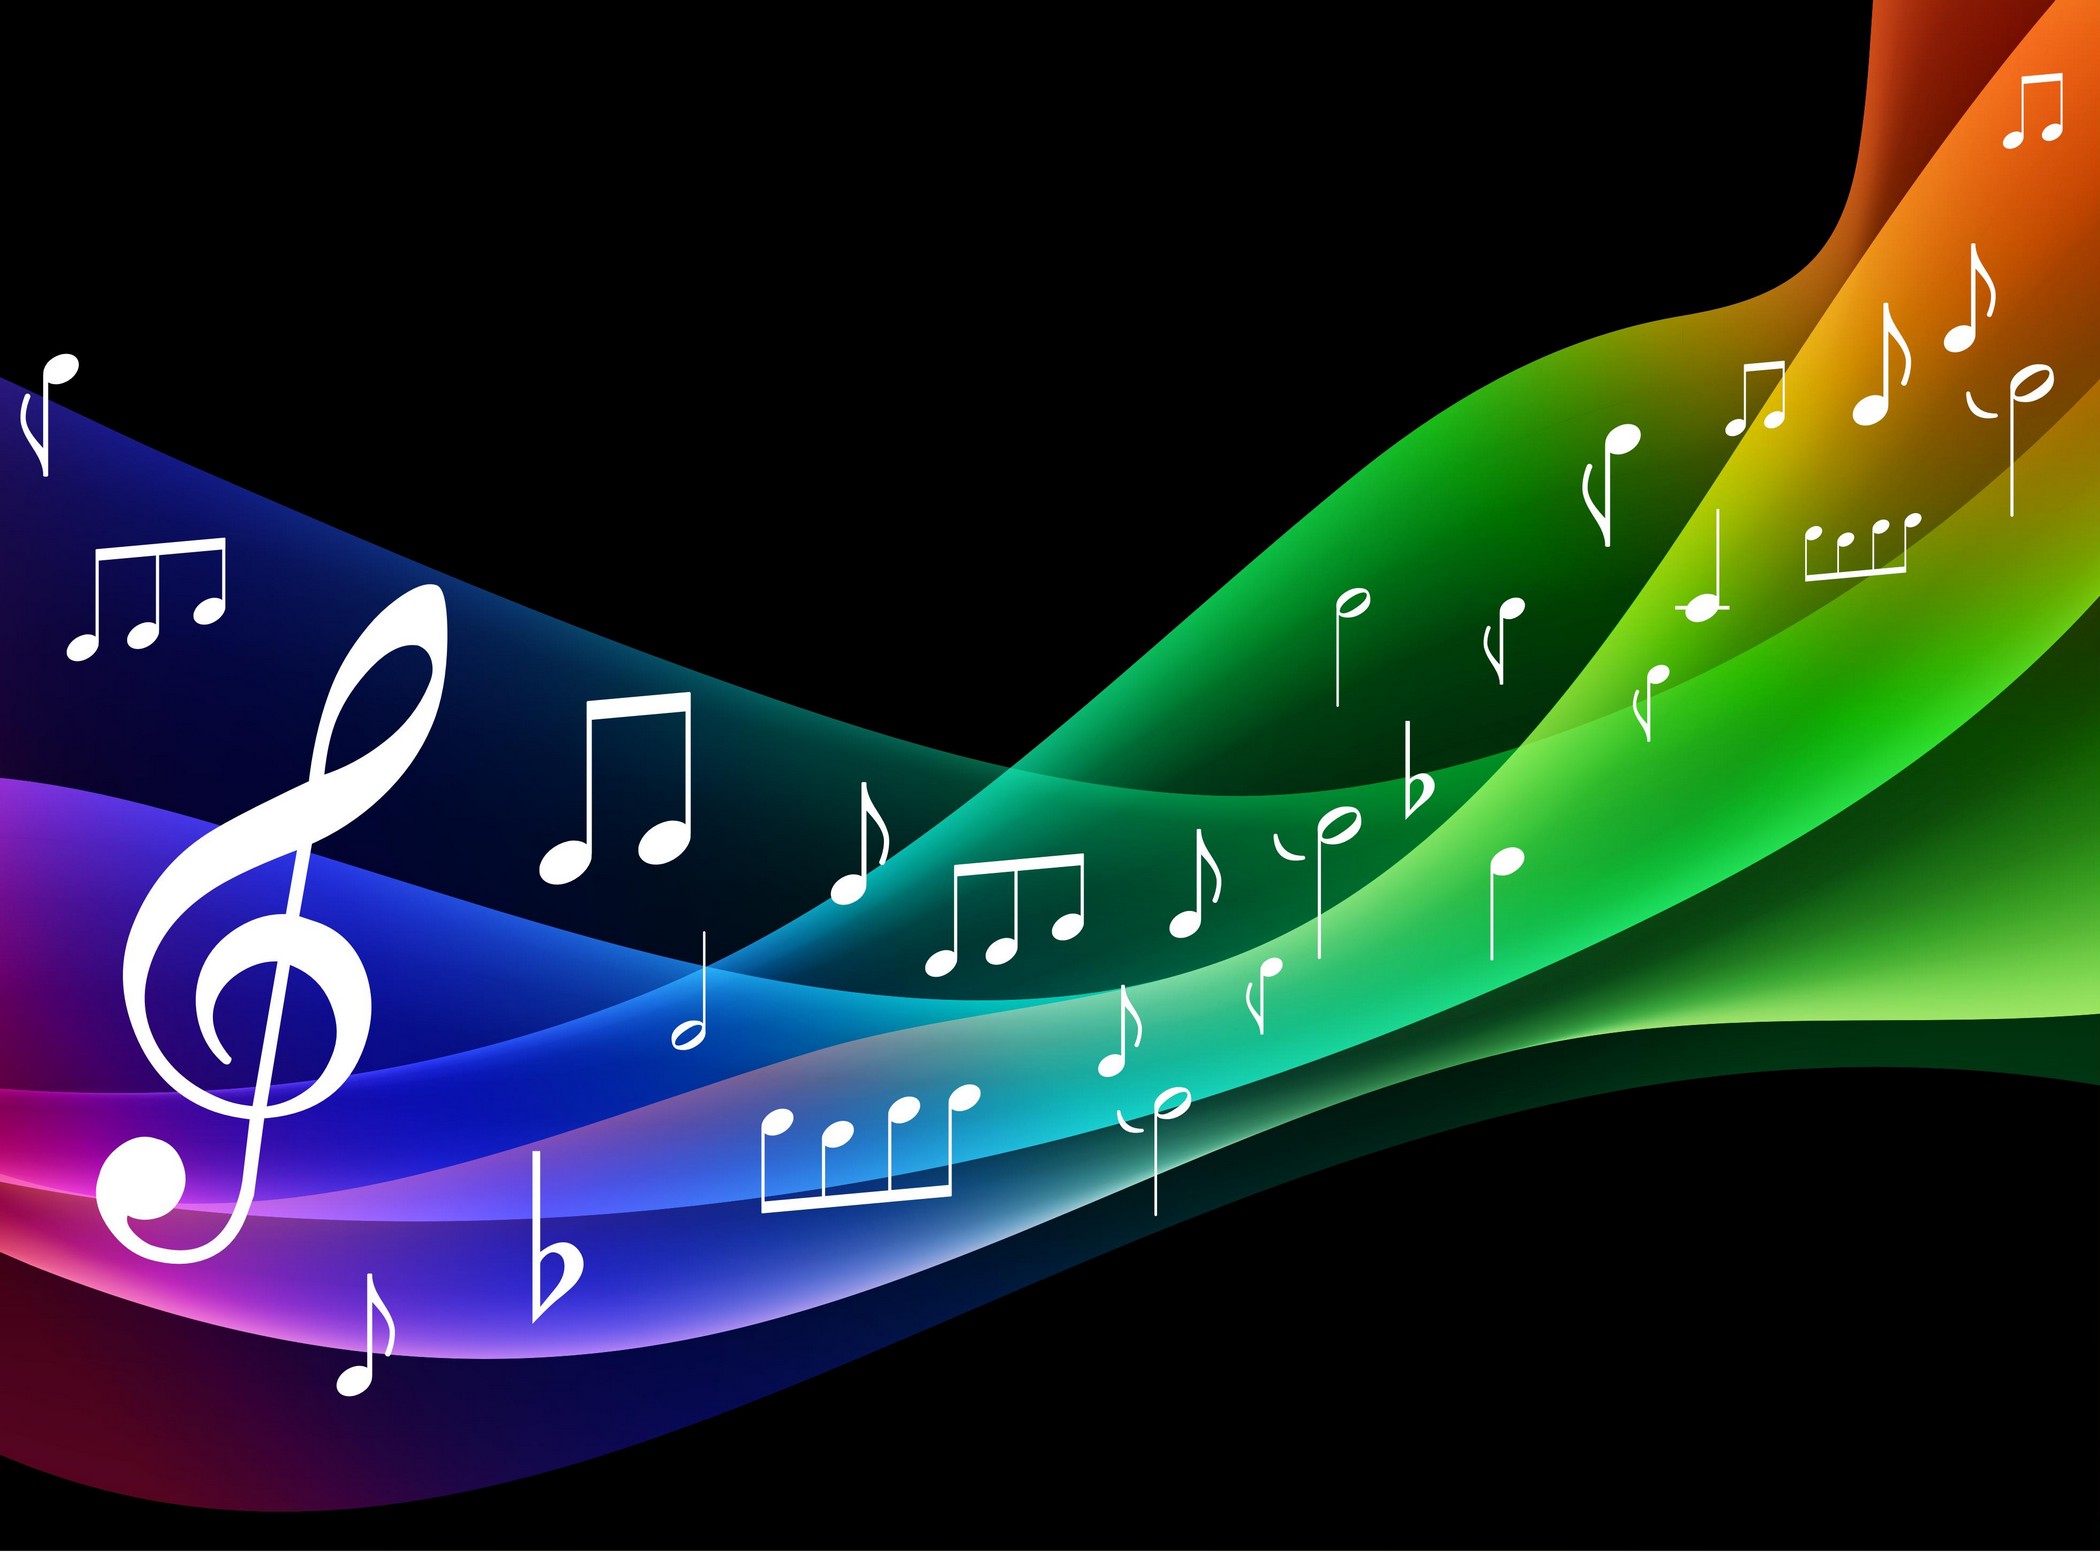 Free Music Background Images - Music Notes With Color - 2100x1552 Wallpaper  